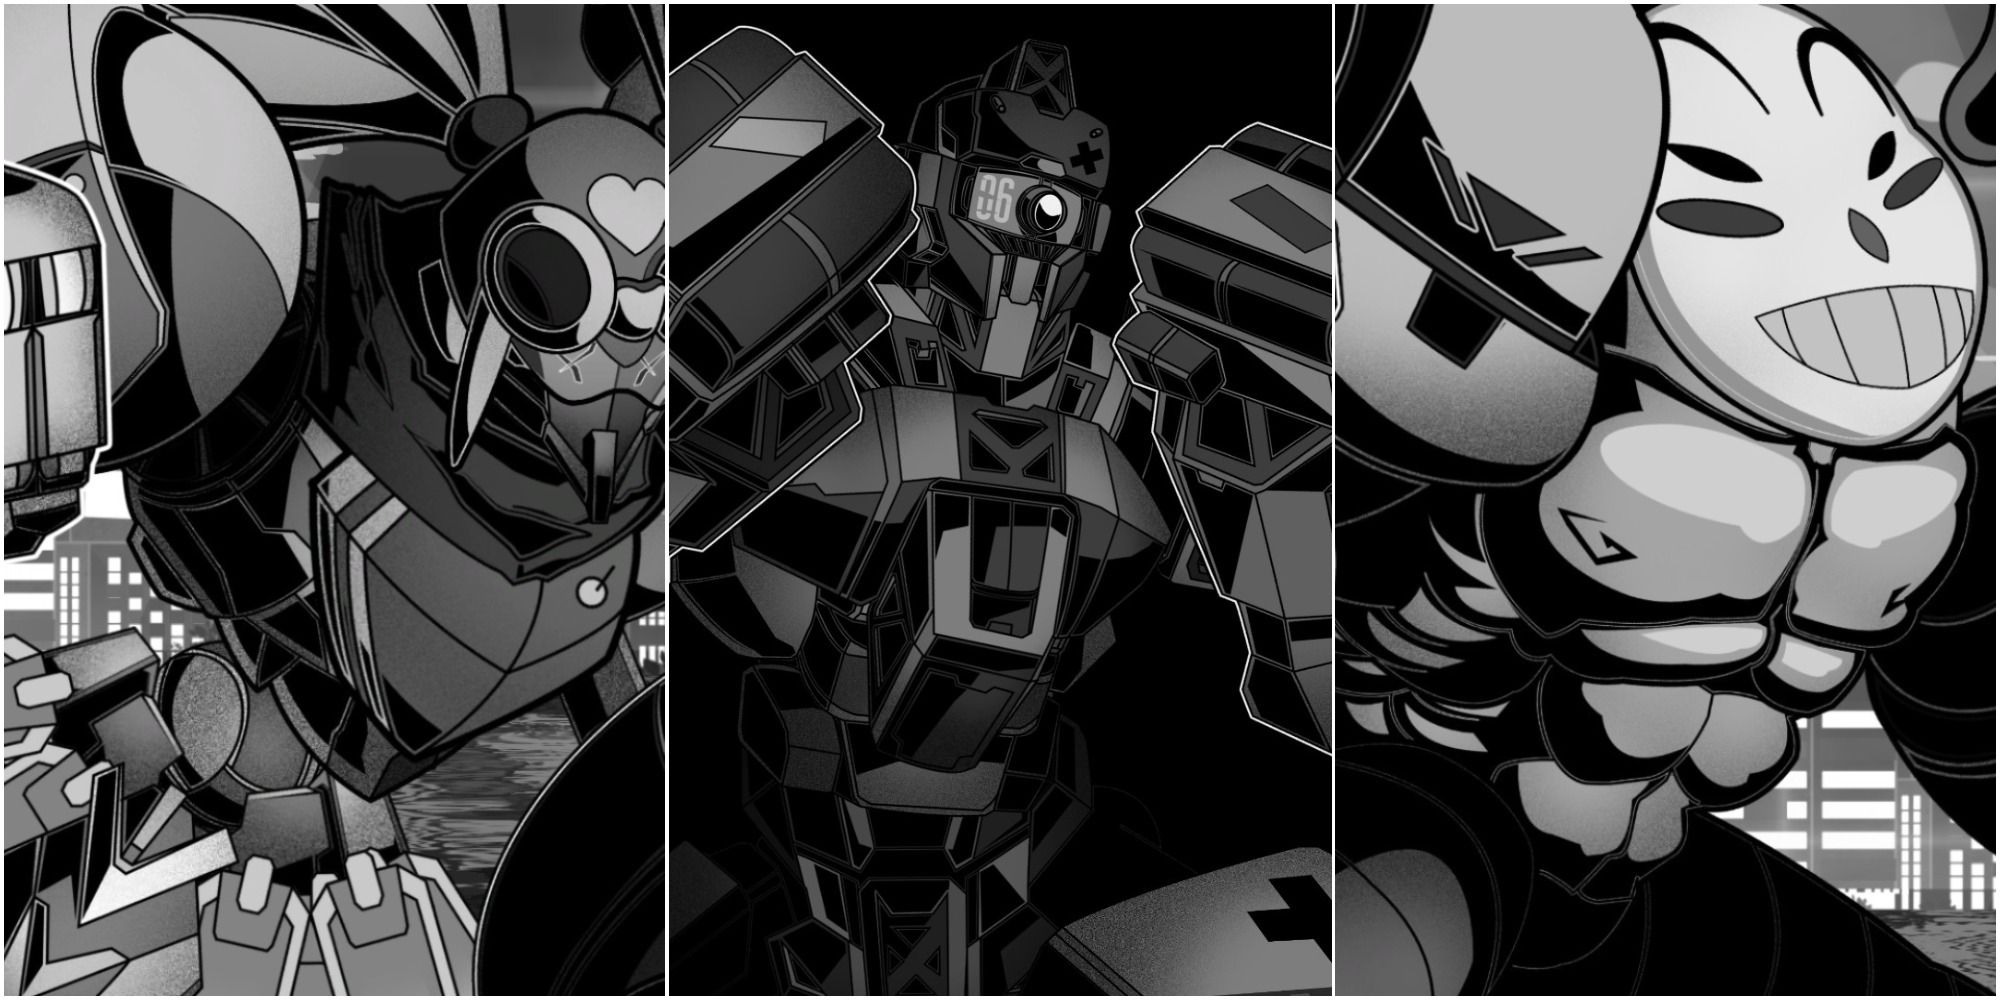 Wolfstride the mech Saint Sailor Sakura lunging on the left, the mech JOE in a fighting stance in the middle and the mech One Winged Duck grinning on the right